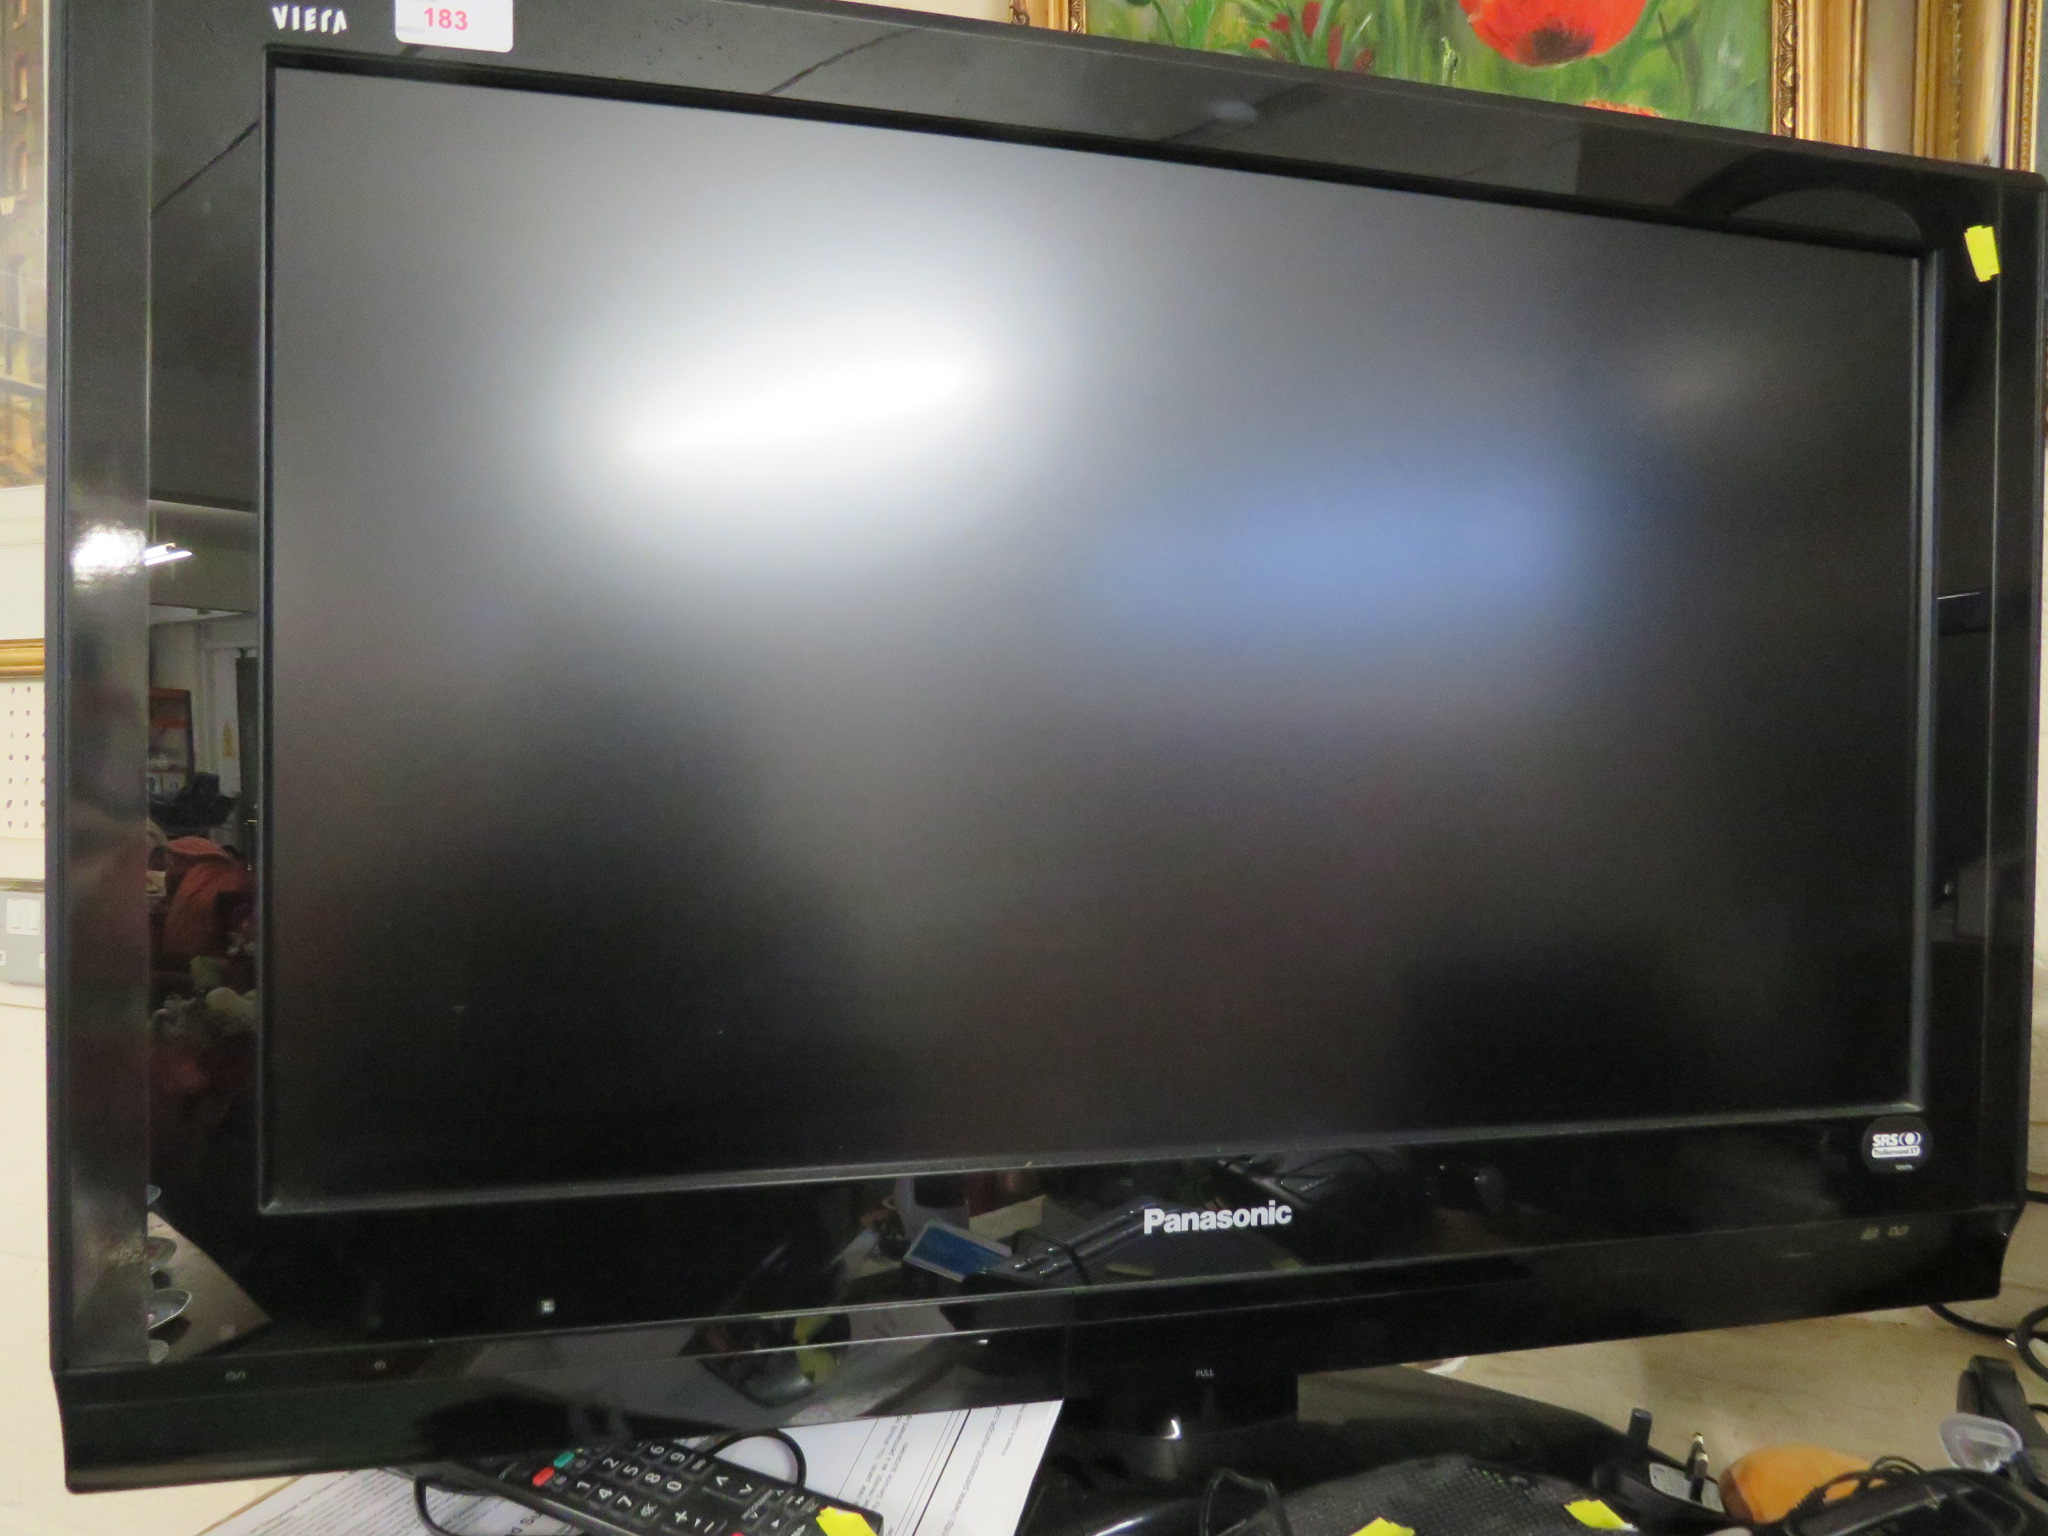 Panasonic Viera 32 inch LCD television with remote and manual.